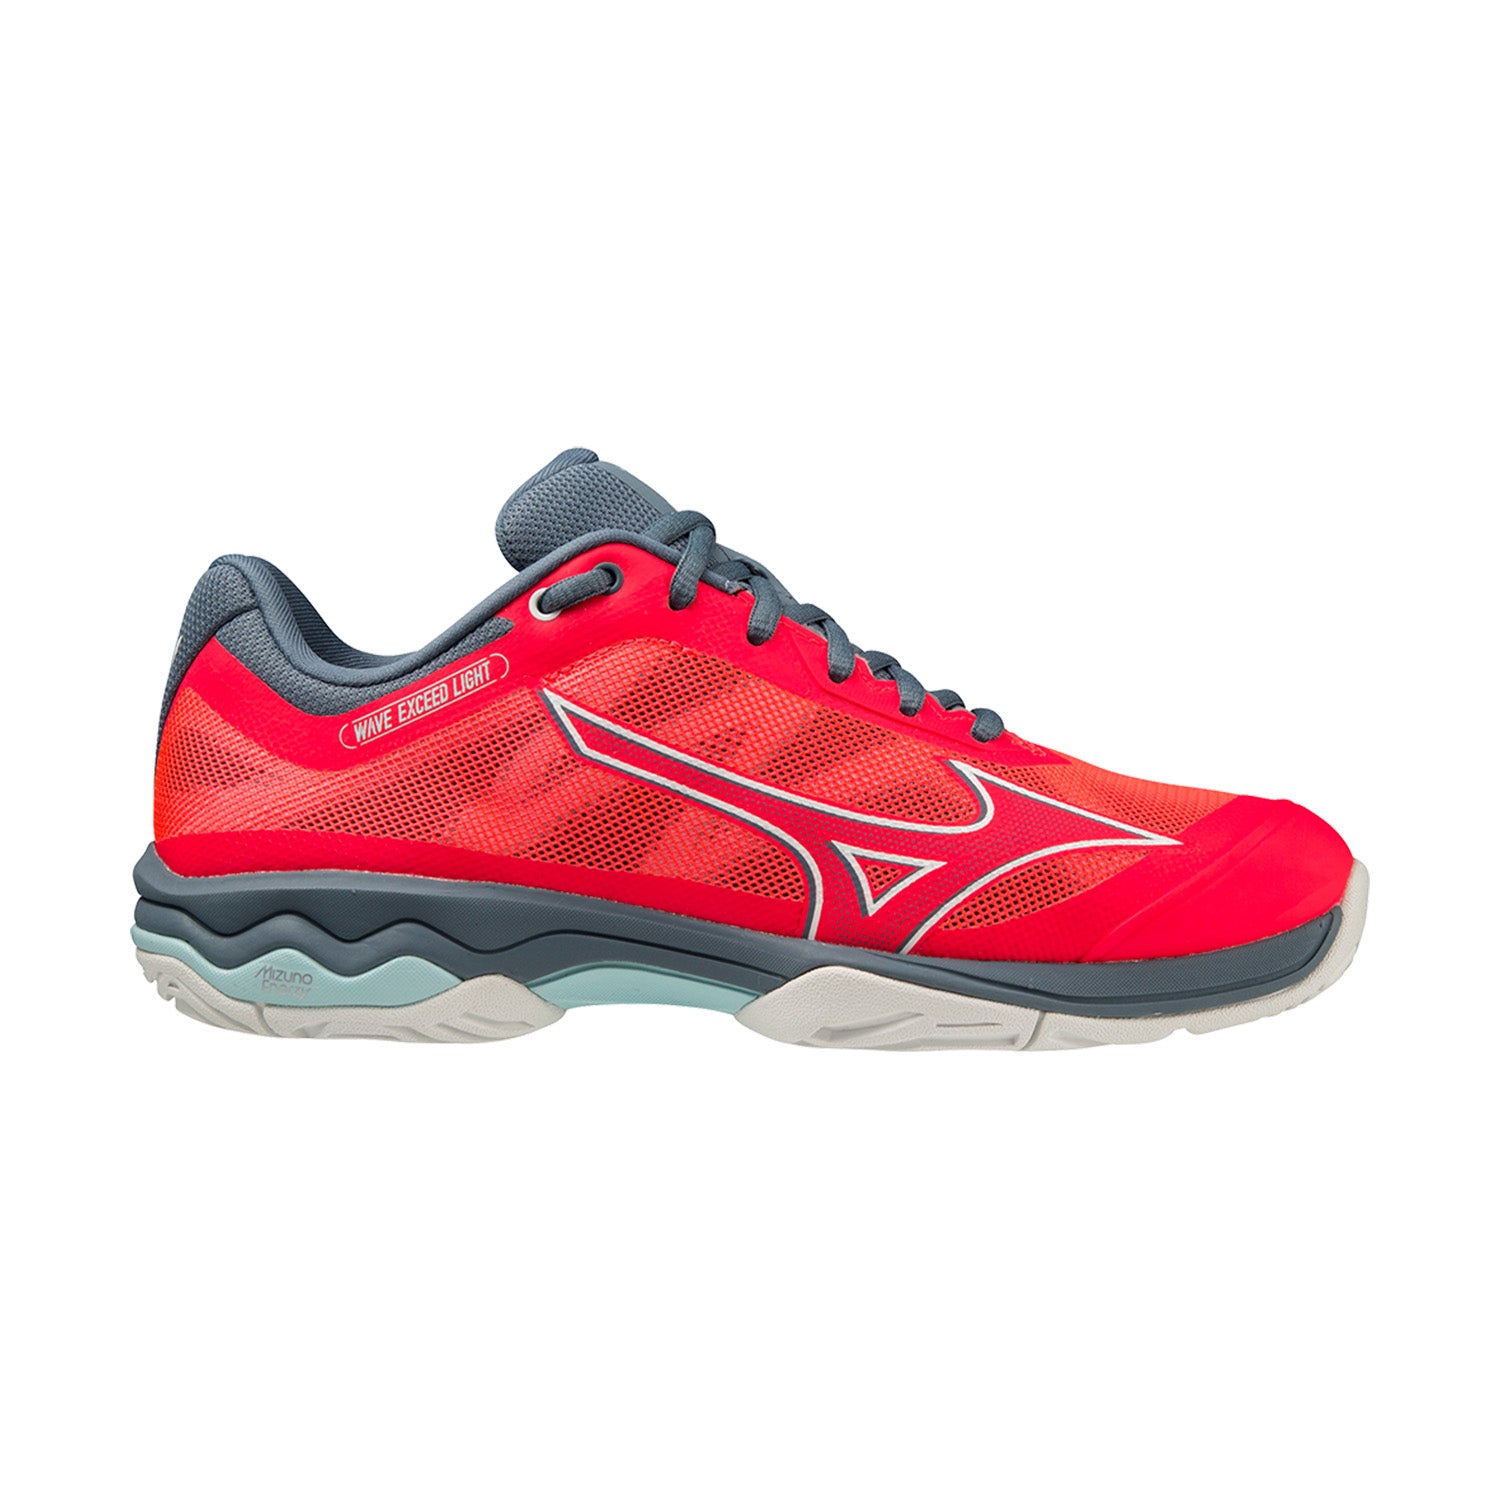 Mizuno Wave Exceed Light CC Fiery Coral 2/White/Blue